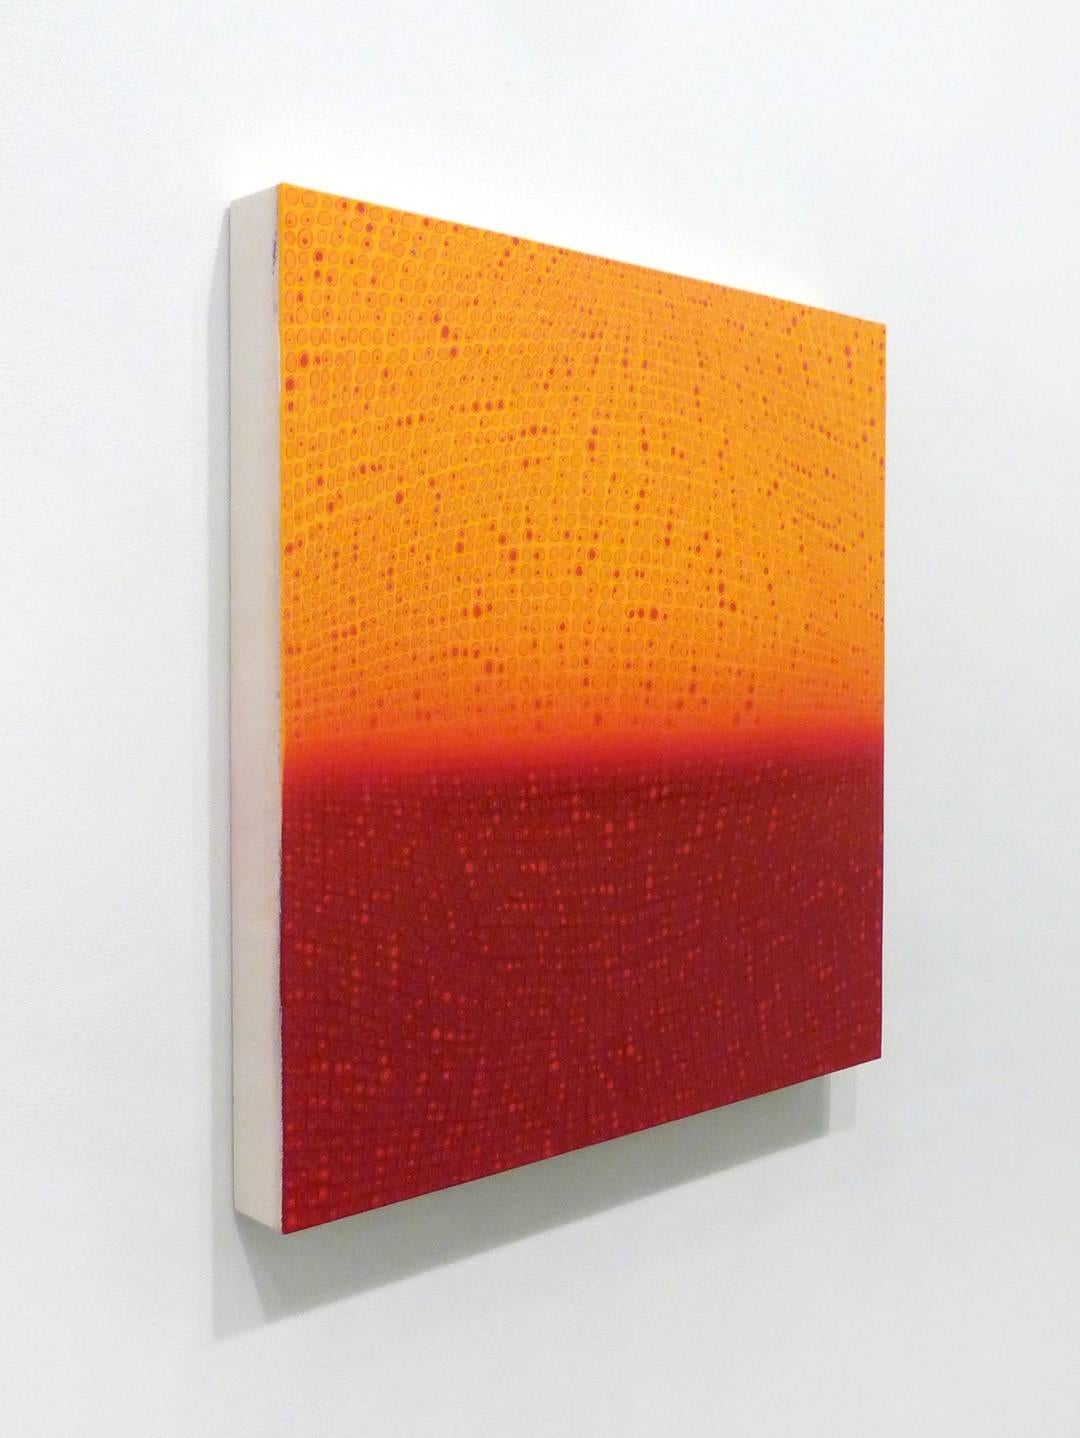 Arch/Horizon Painting 1 - Orange Abstract Painting by Teo González